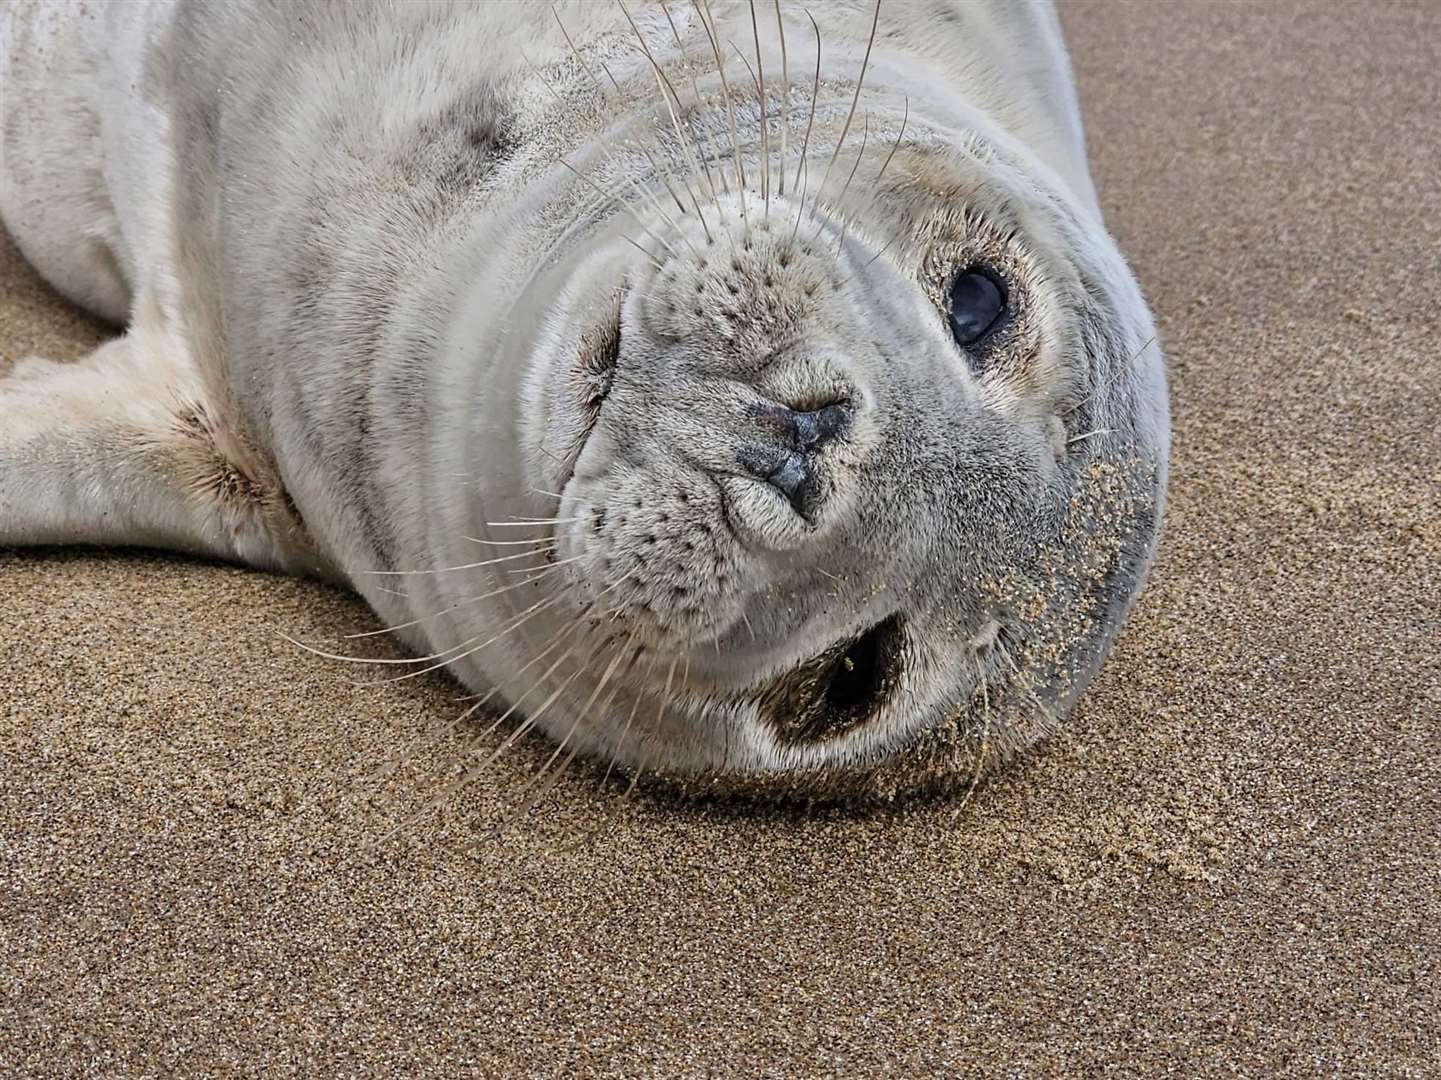 The seal found in Broadstairs was suffering from breathing issues. Picture: Mark Noone